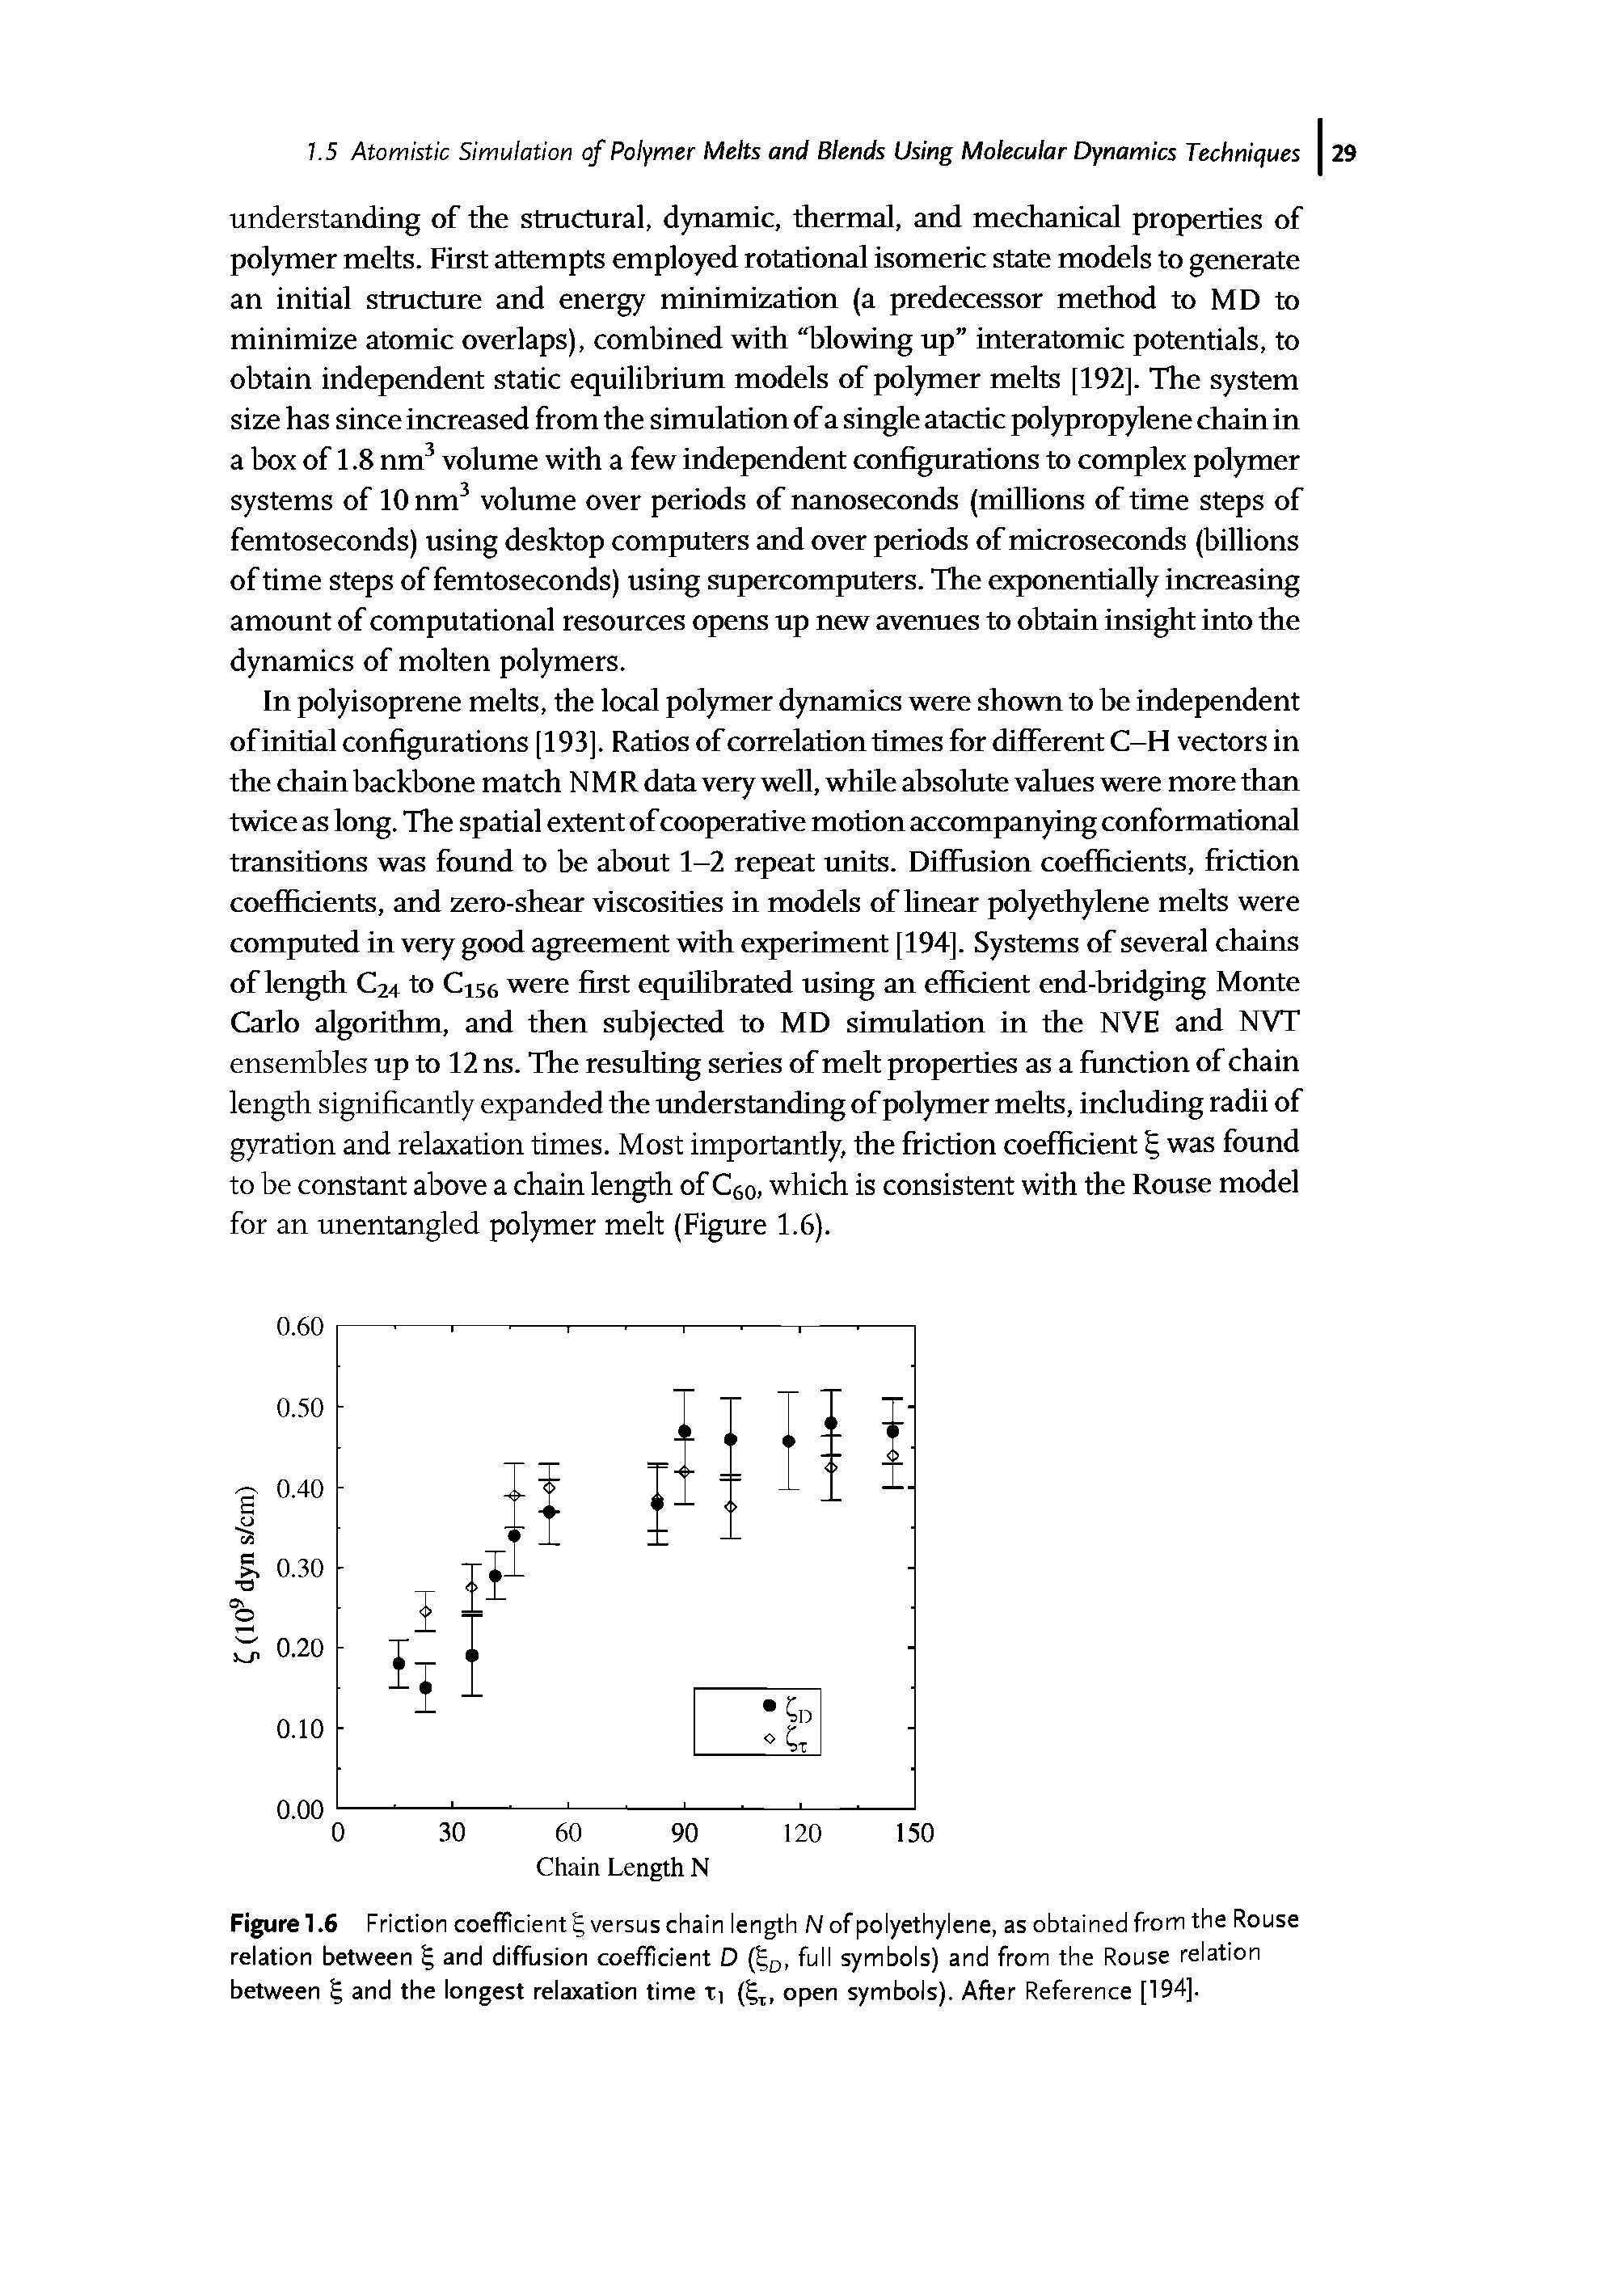 Figure 1.6 Friction coefficient versus chain length N of polyethylene, as obtained from the Rouse relation between and diffusion coefficient D ( d, full symbols) and from the Rouse relation between and the longest relaxation time ti (I, open symbols). After Reference [194].